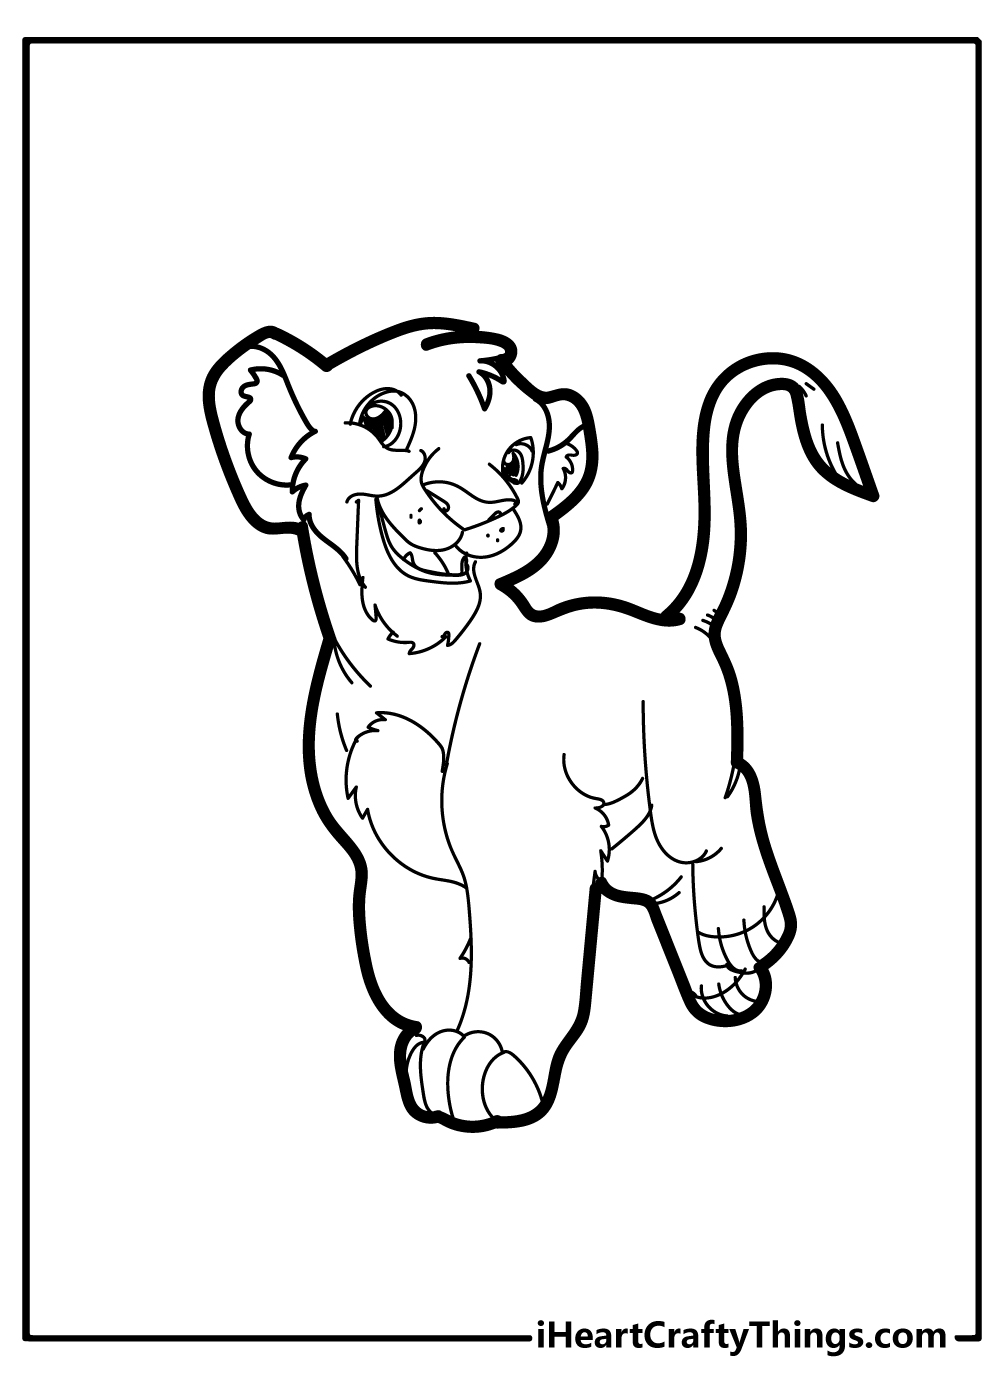 Printable Lion Coloring Pages Updated 20